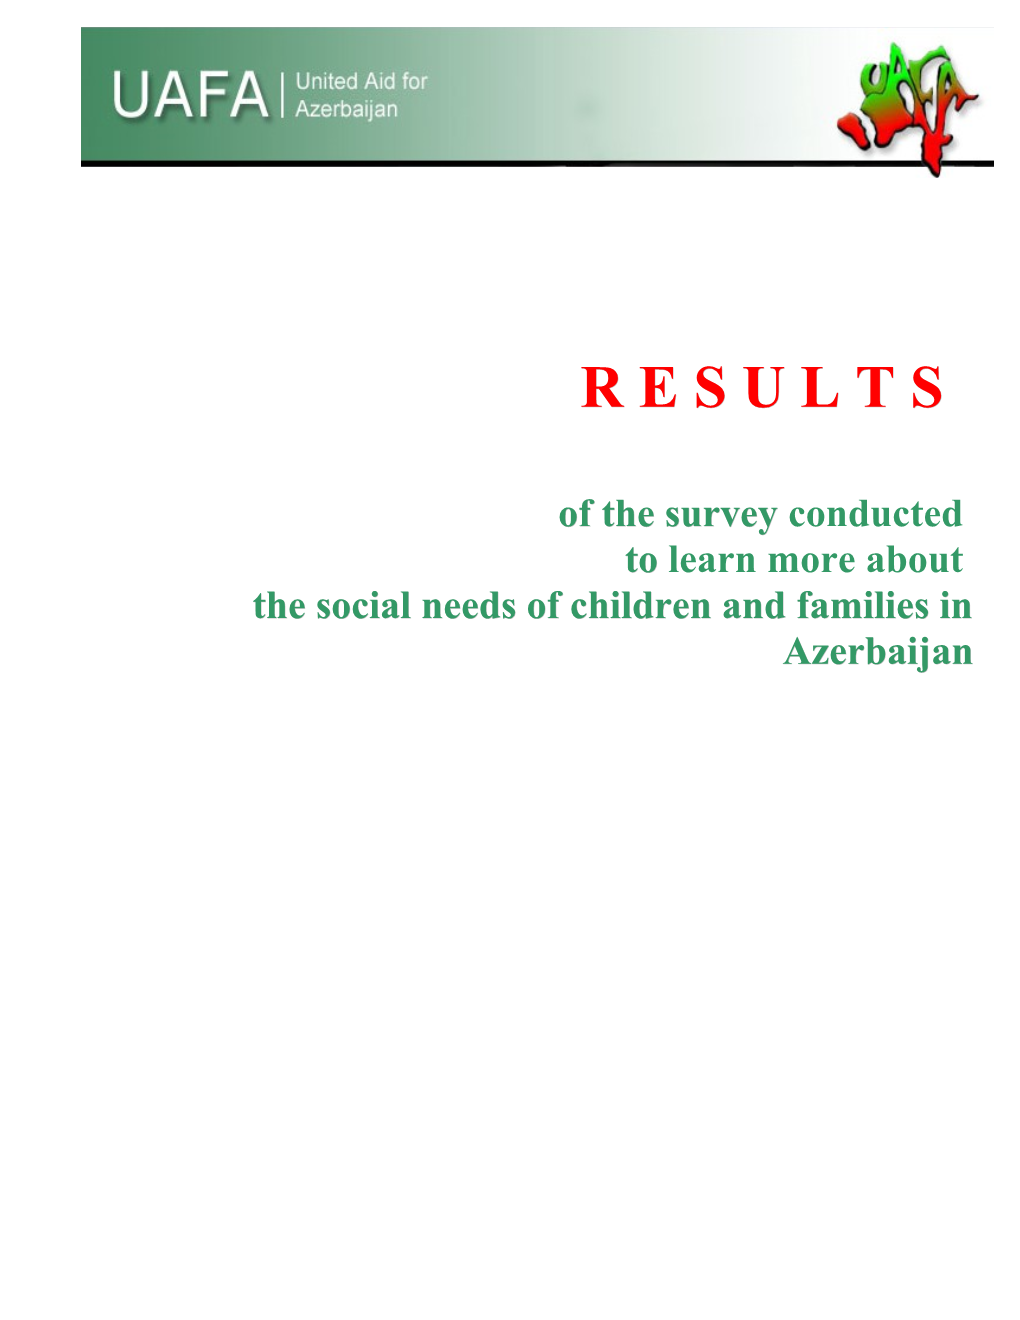 The Social Needs of Children and Families in Azerbaijan